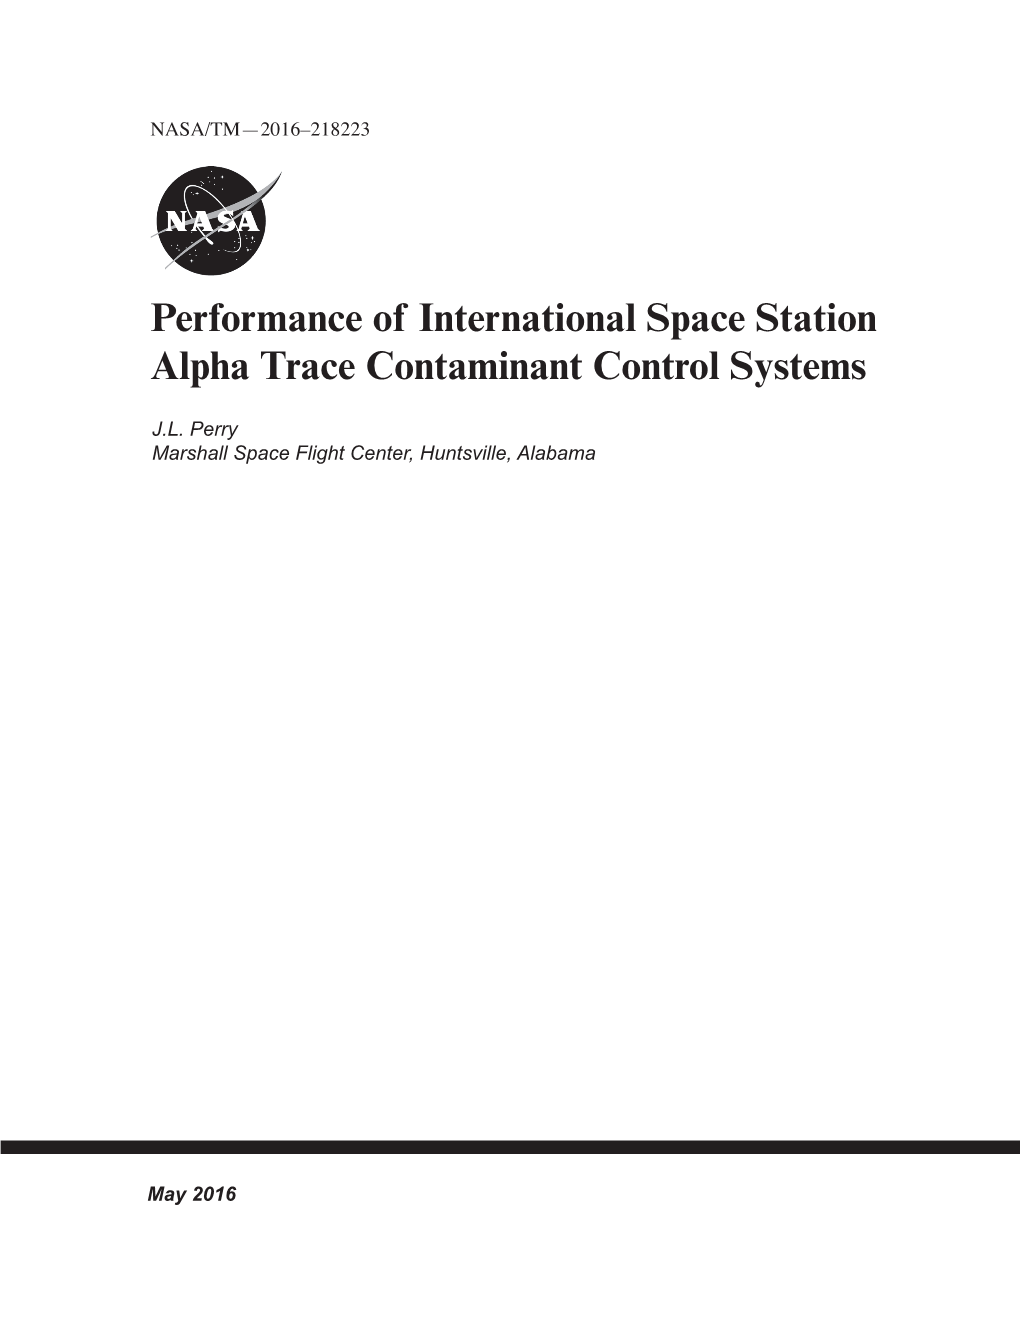 Performance of International Space Station Alpha Trace Contaminant Control Systems